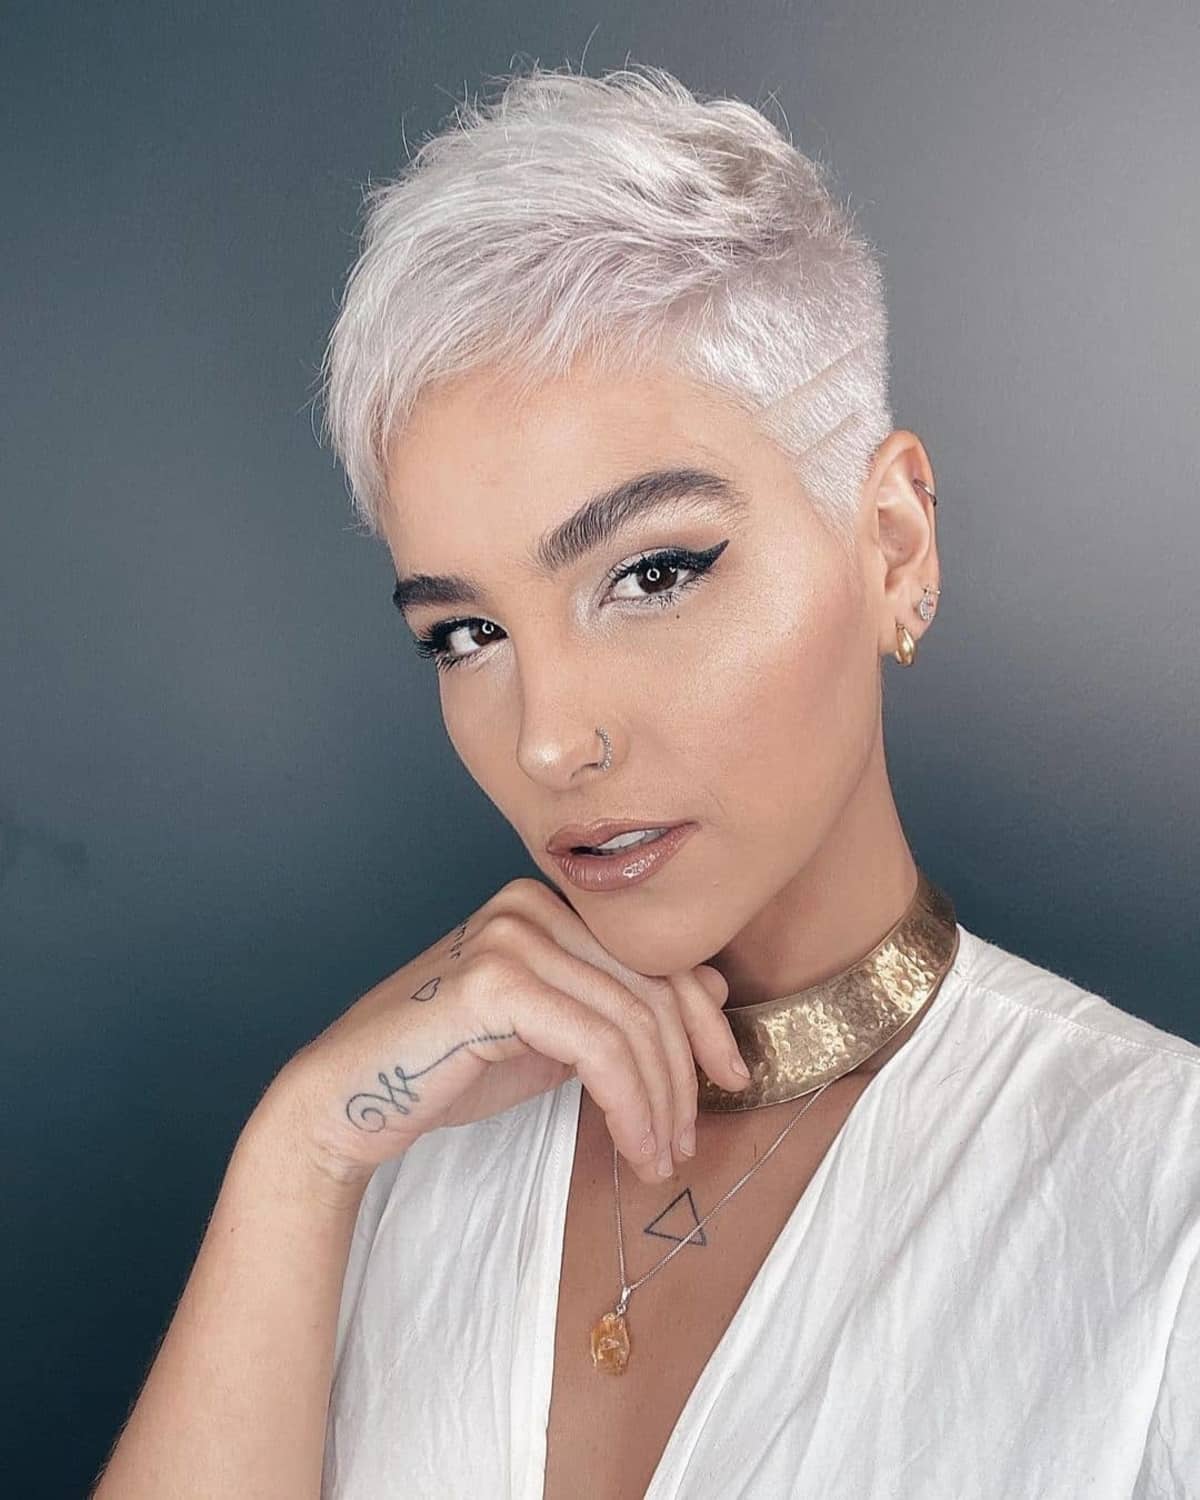 19 Best Very Short Haircuts for Women This Year